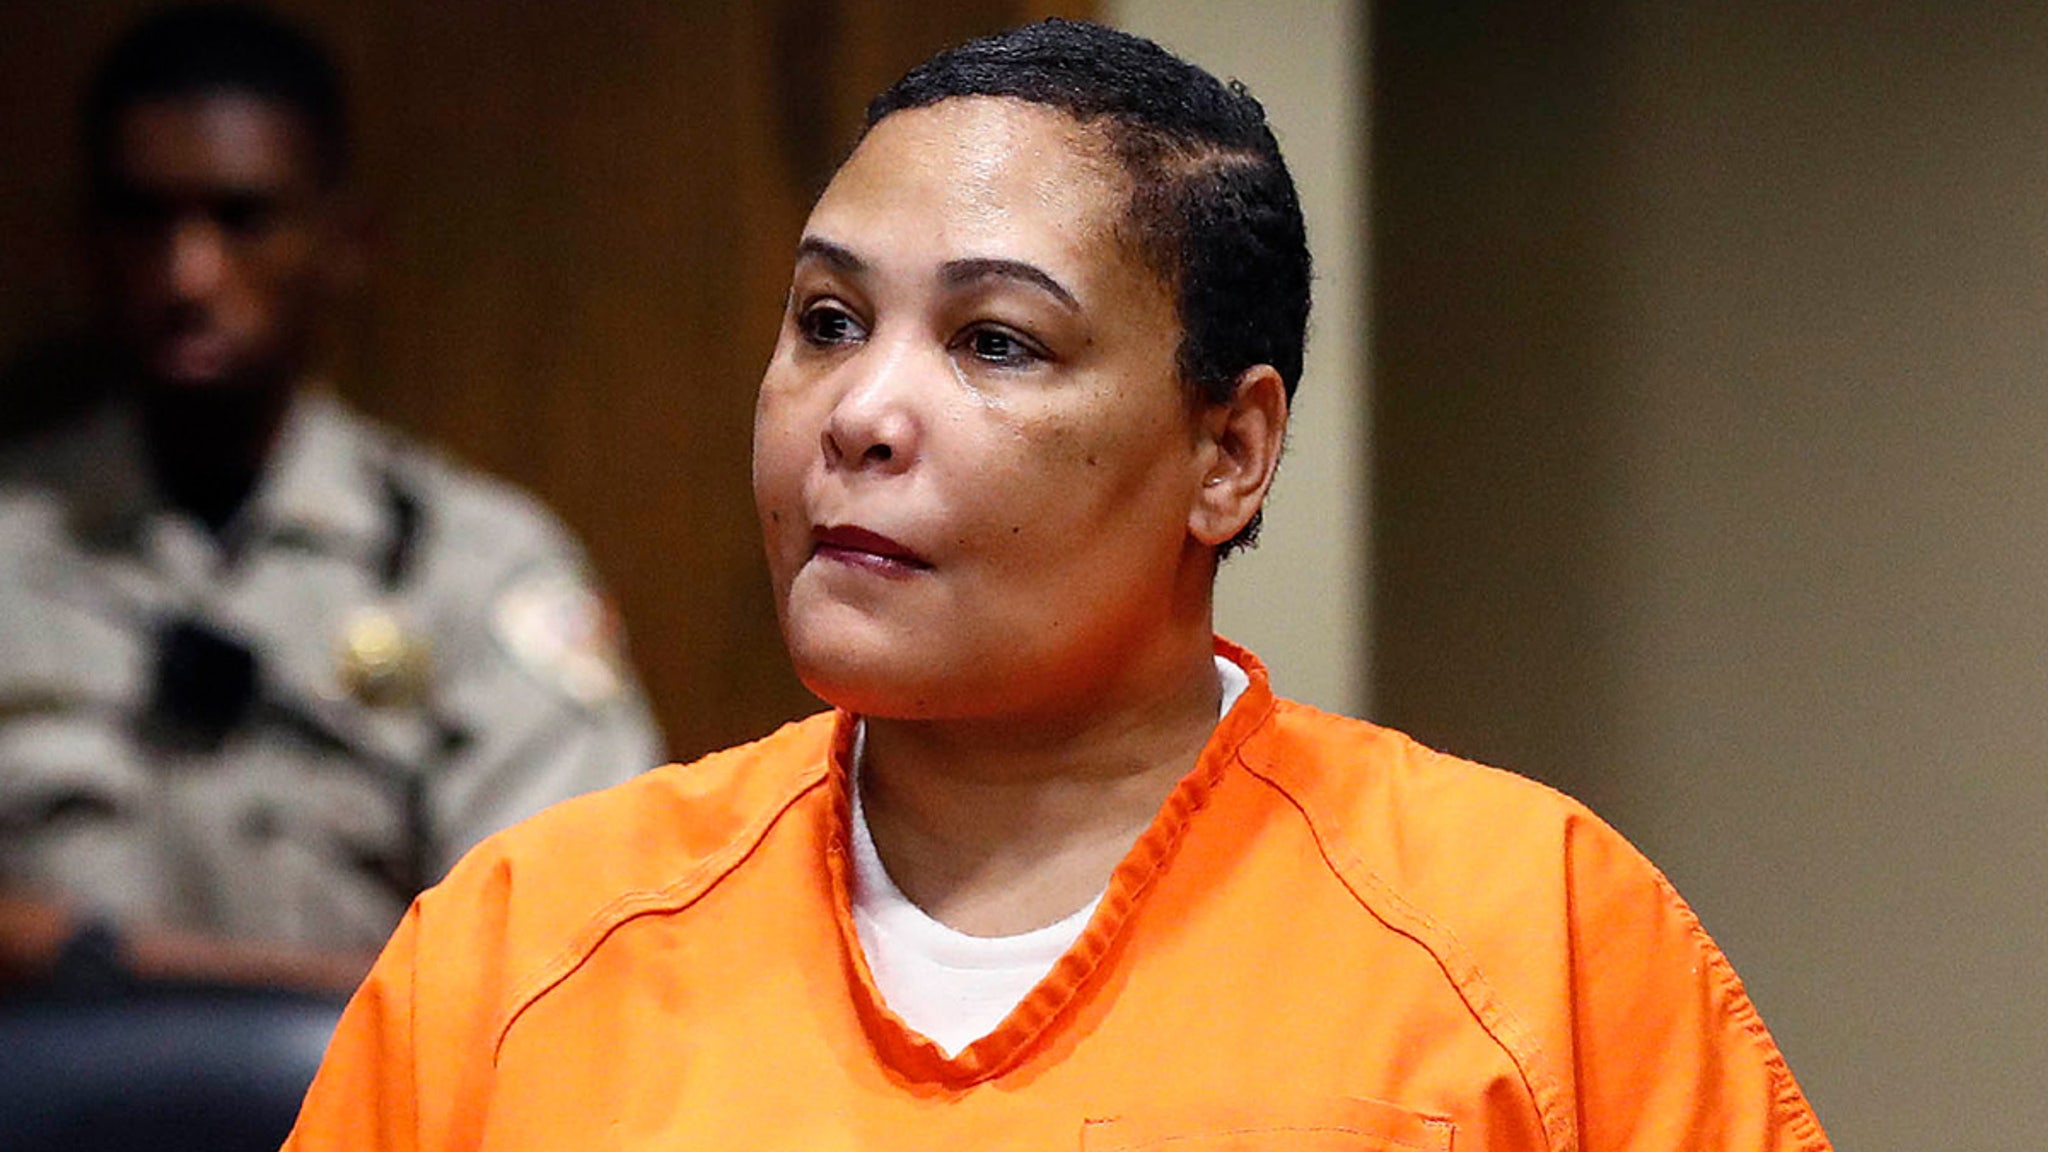 Lorenzen Wright's ex-wife arrested in connection to NBA star's